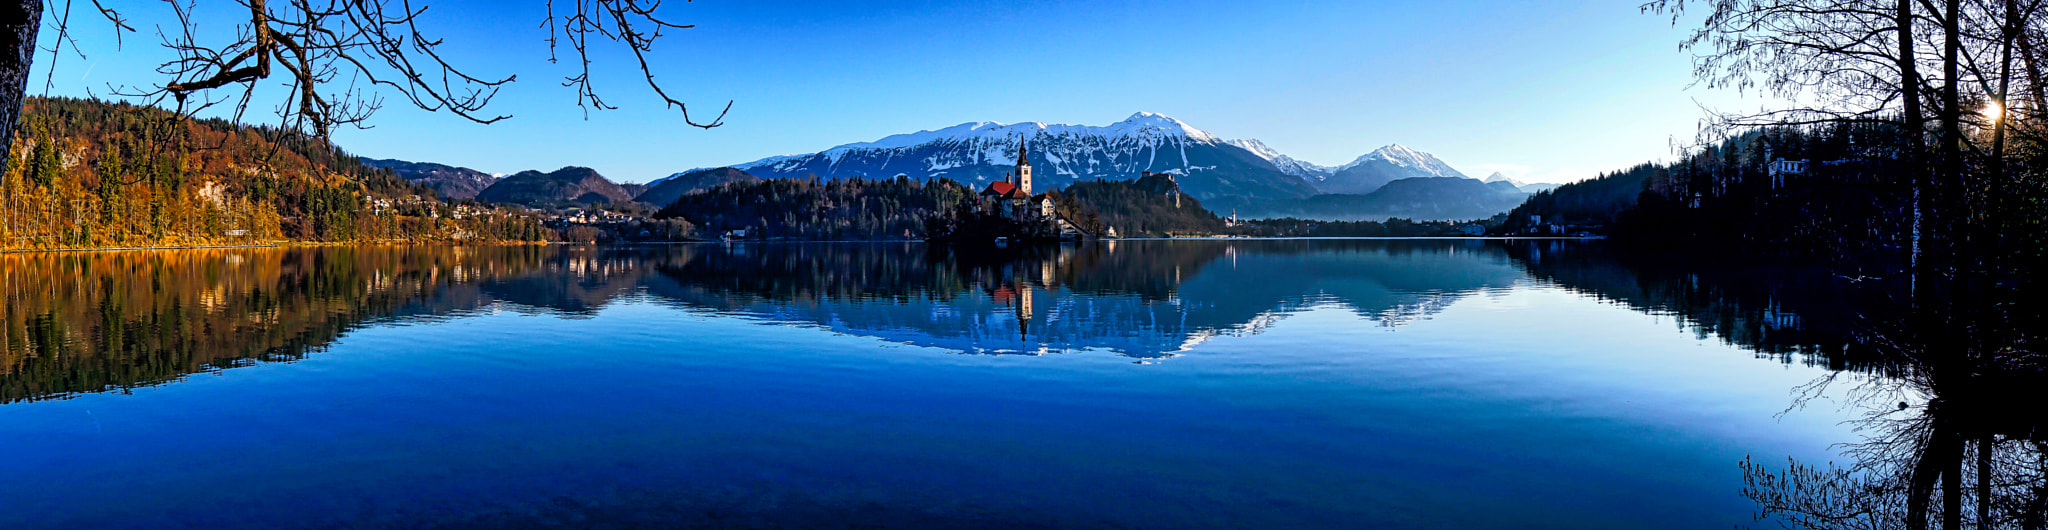 Sony E 10-18mm F4 OSS sample photo. Lake bled panorama photography